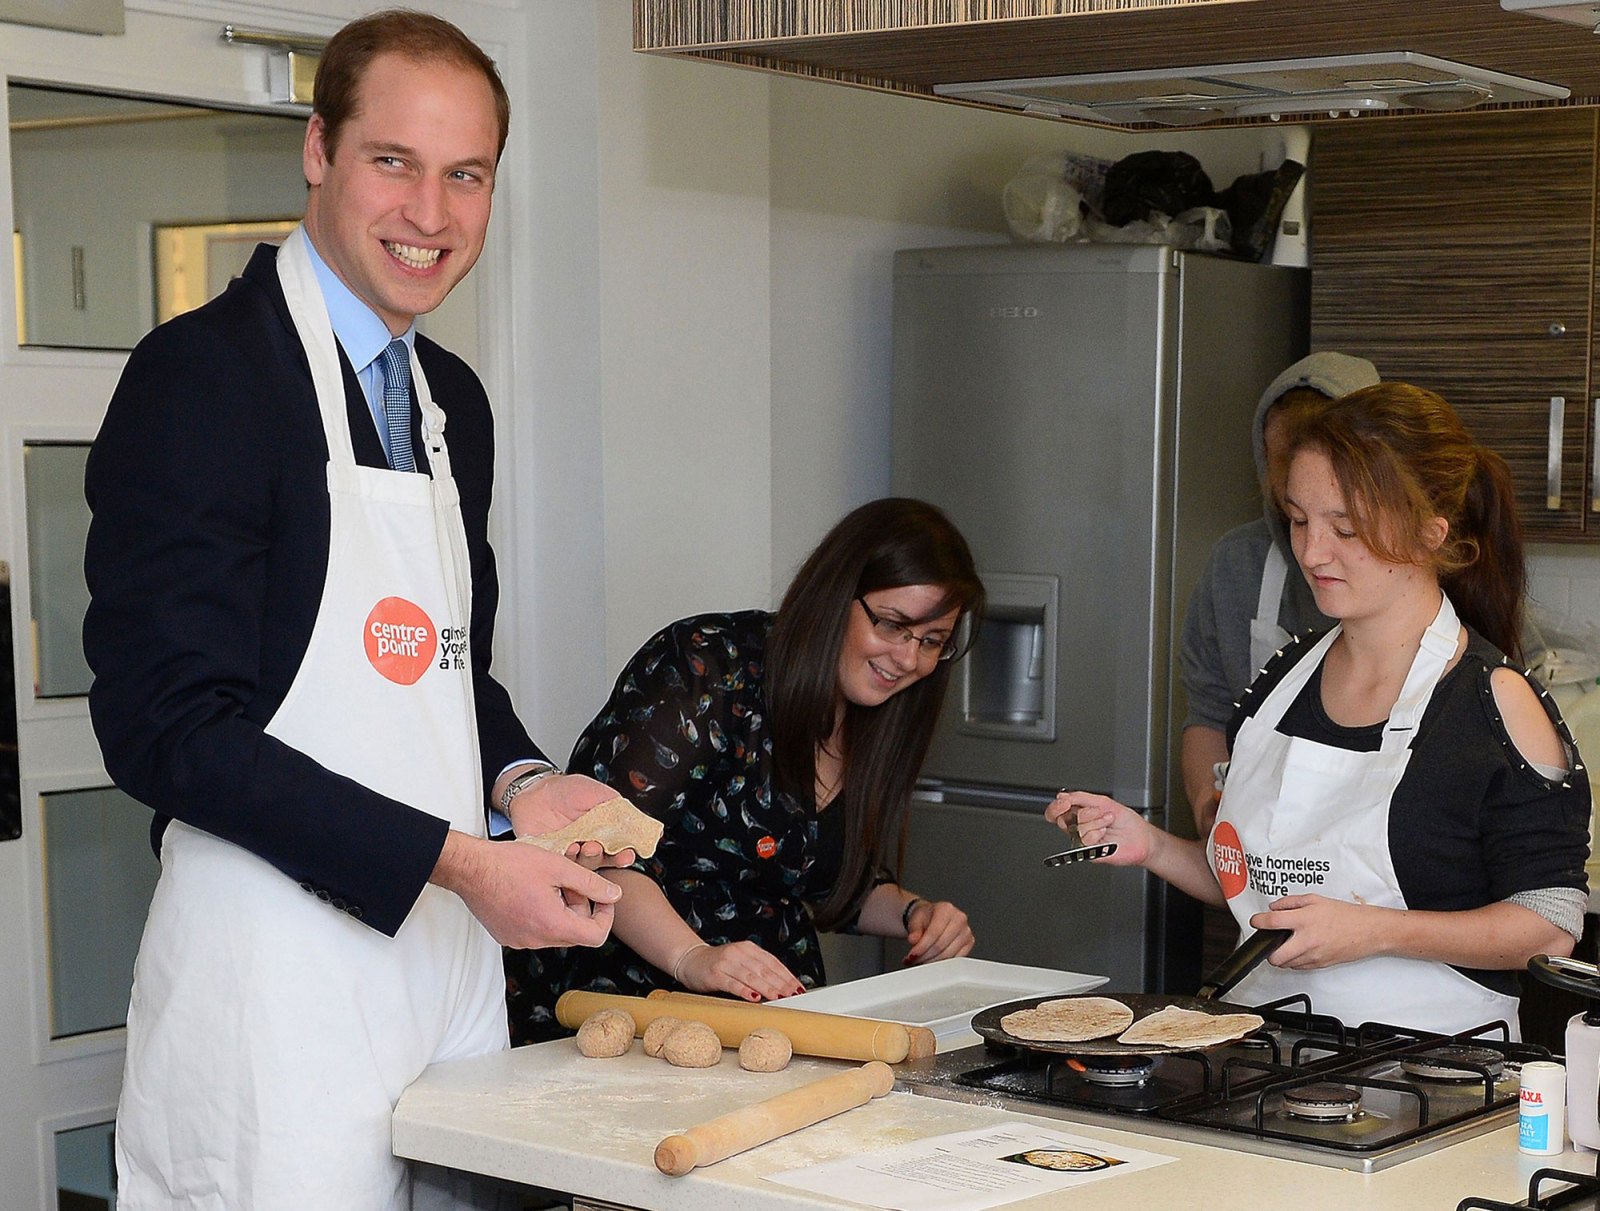 Royal Family Cooking Through the Years: Prince William Makes Pudding With Prince George, Princess Kate Flips Pancakes and More white apron